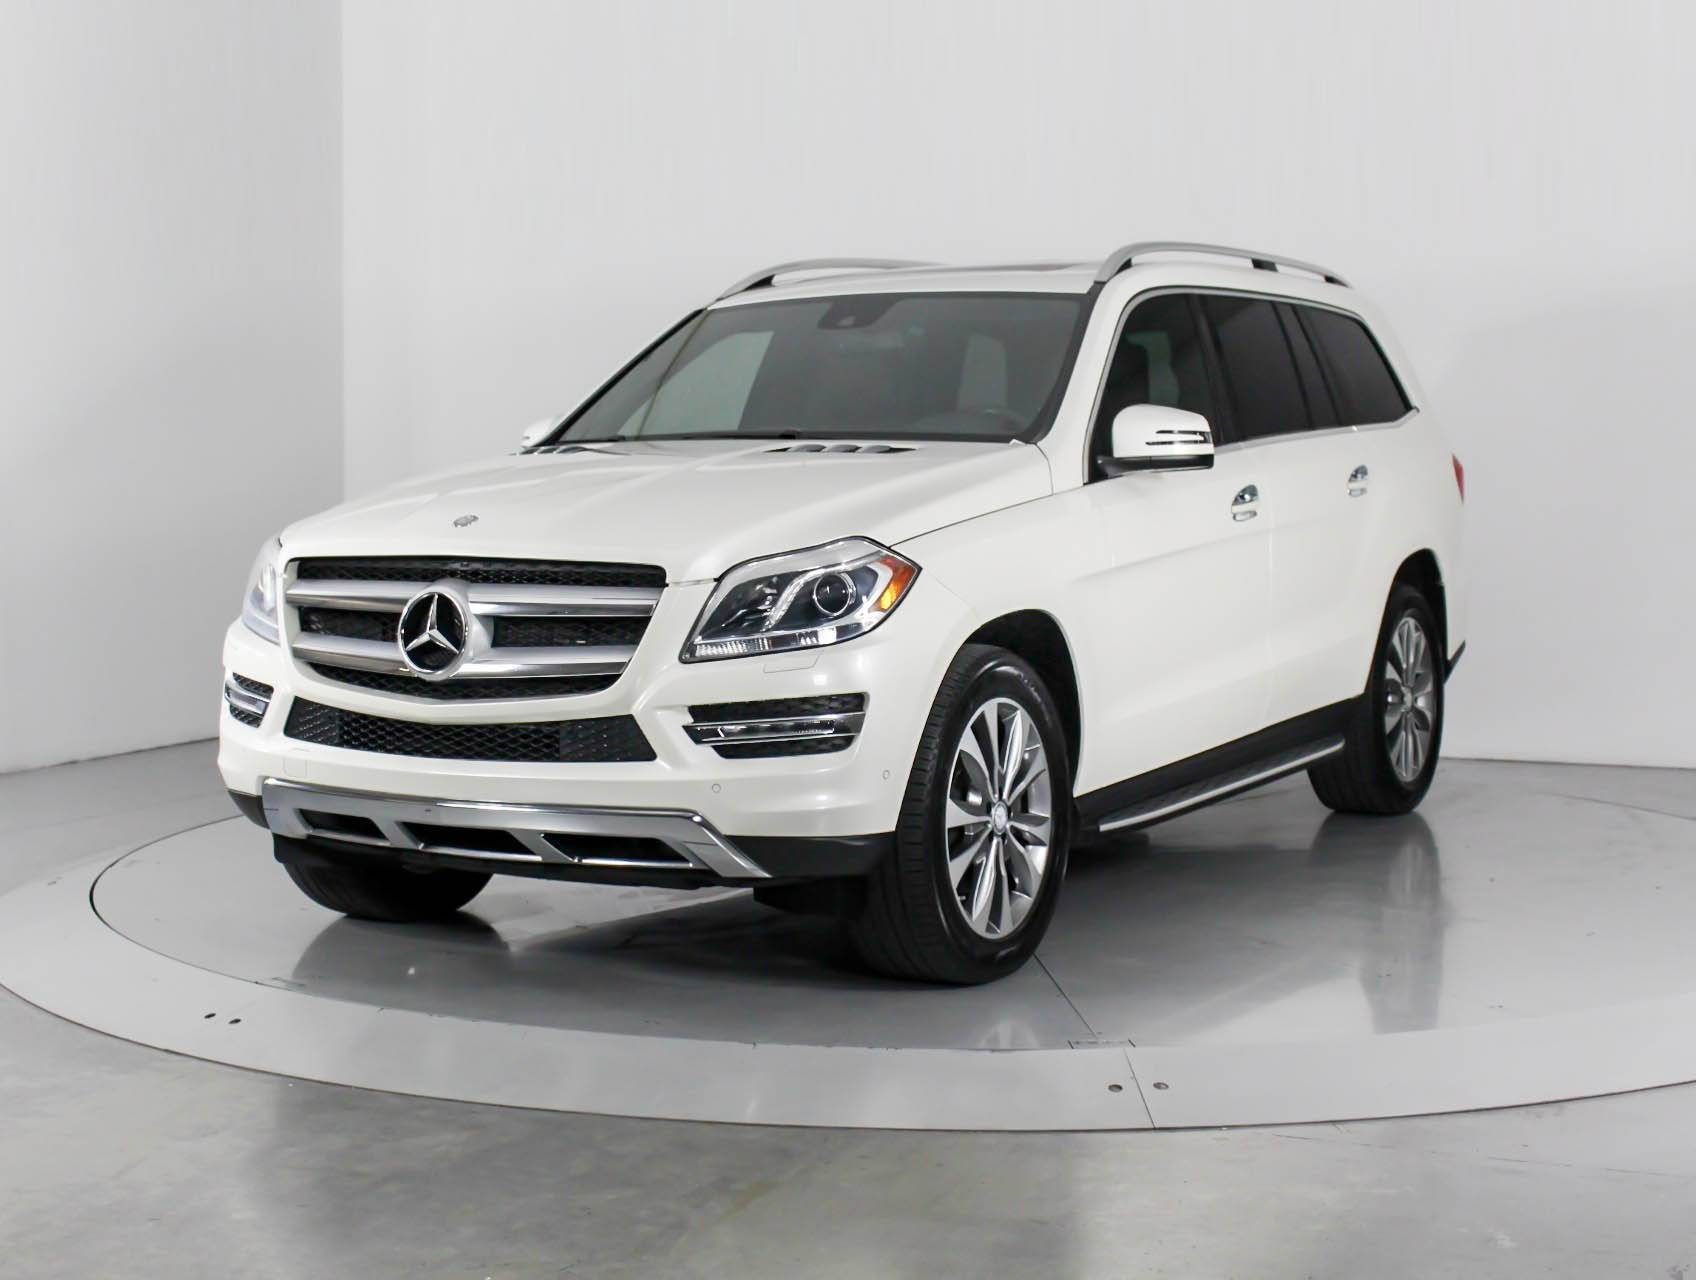 Used 2015 MERCEDES-BENZ GL CLASS GL350 BLUETEC for sale in WEST PALM |  103793